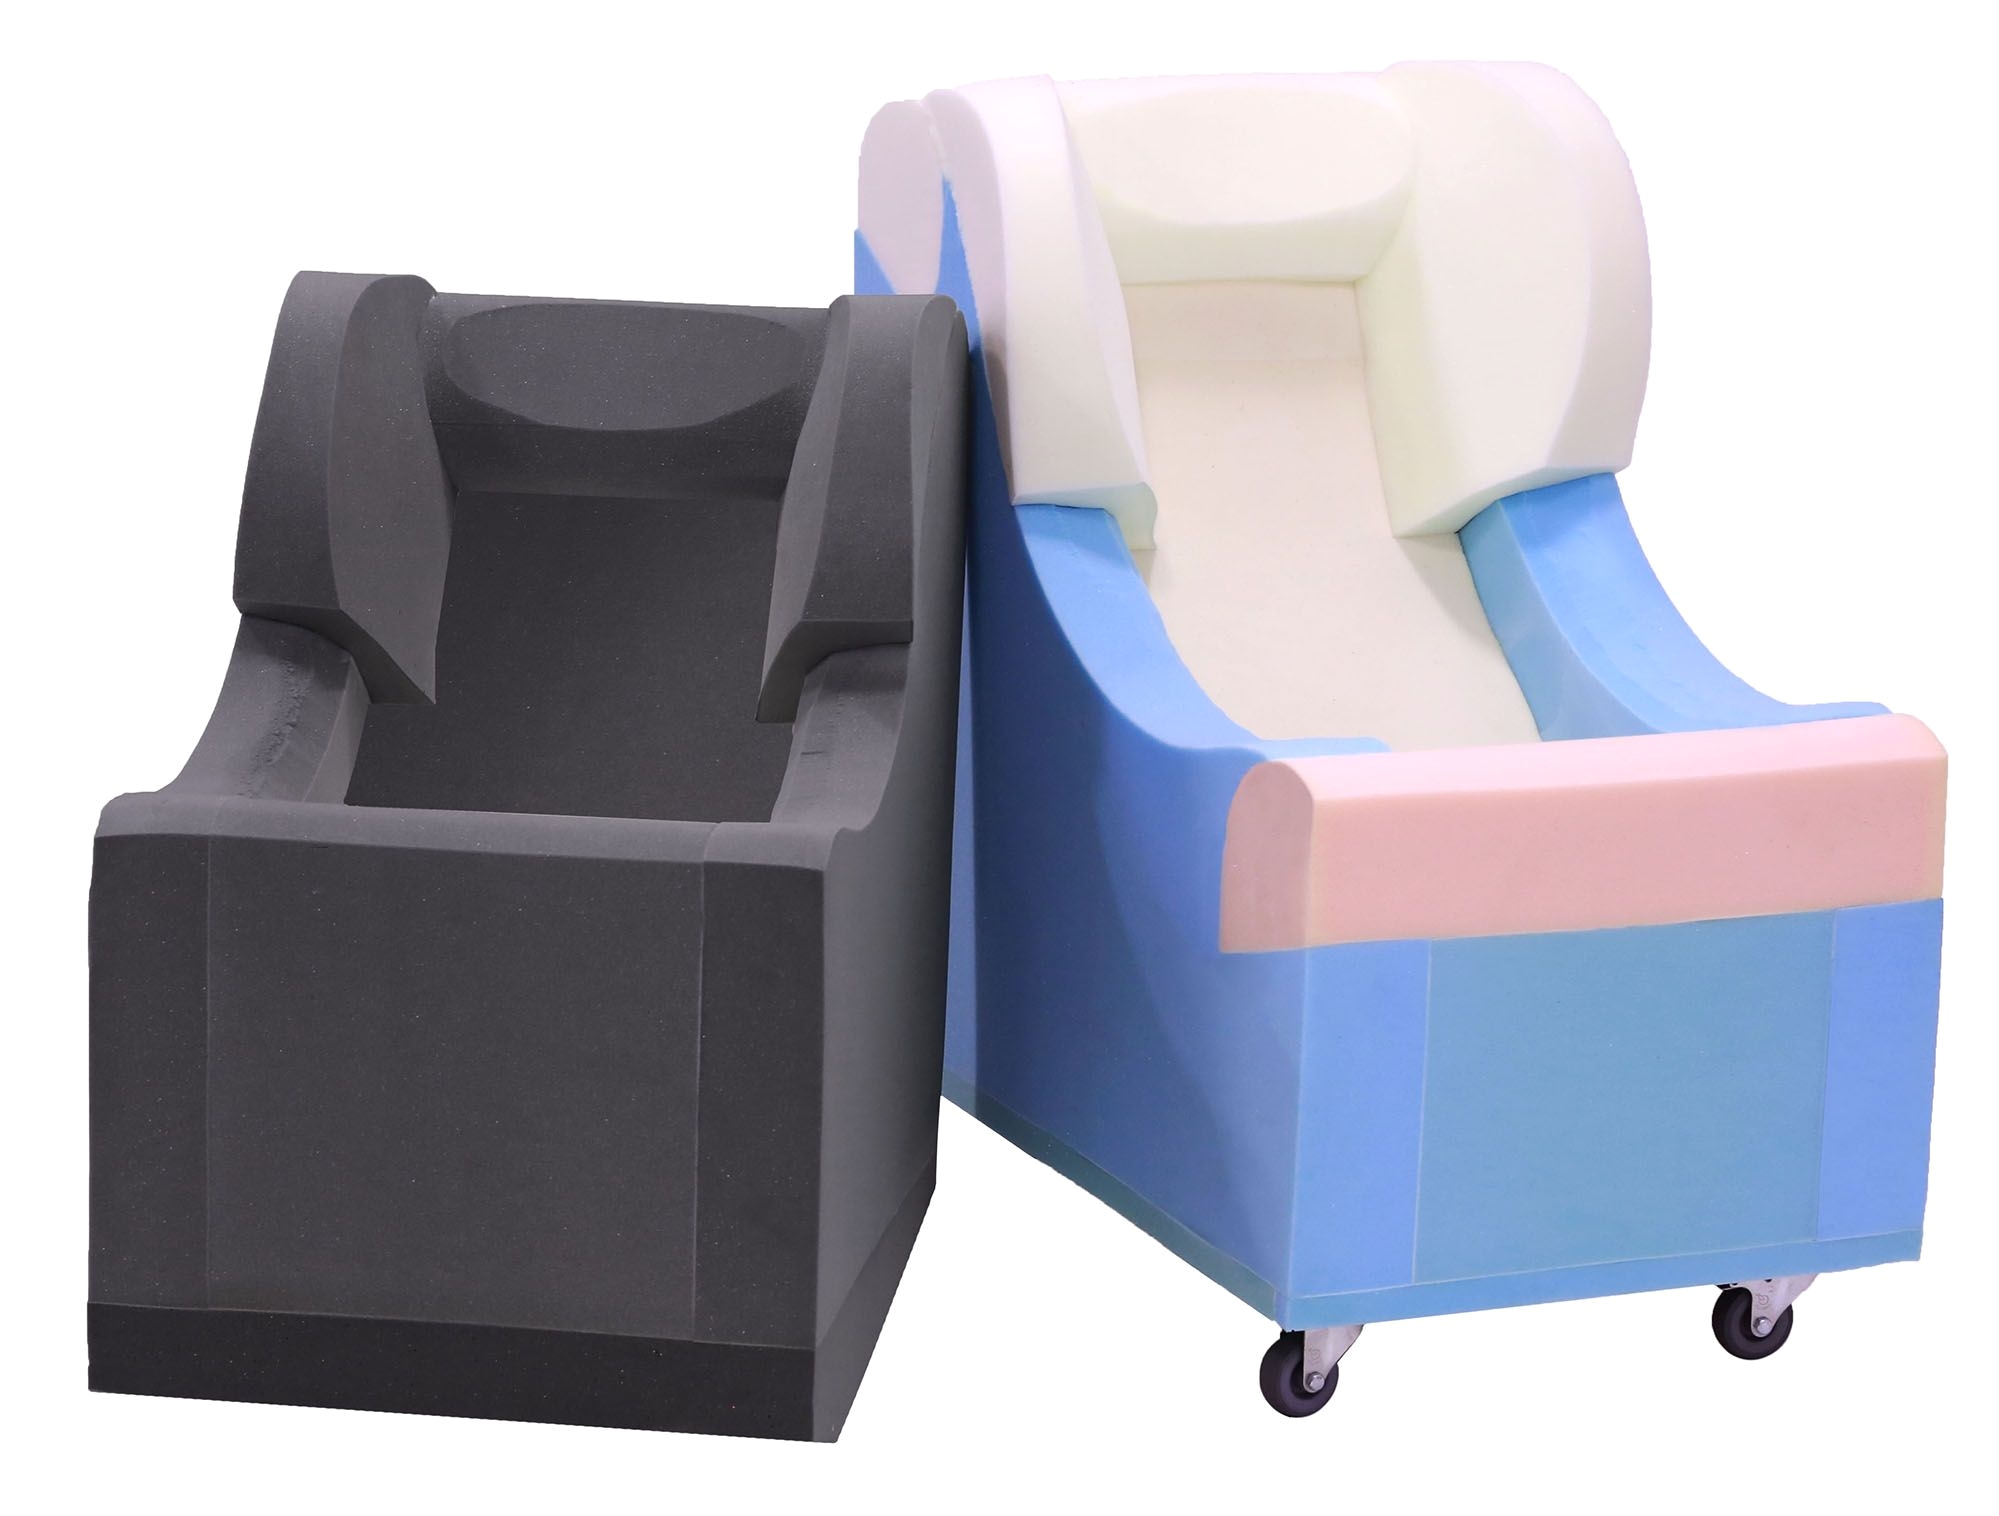 Bath Chair for Child with Special Needs Special Needs Seating Chill Out Chair Feeding Comfort Package